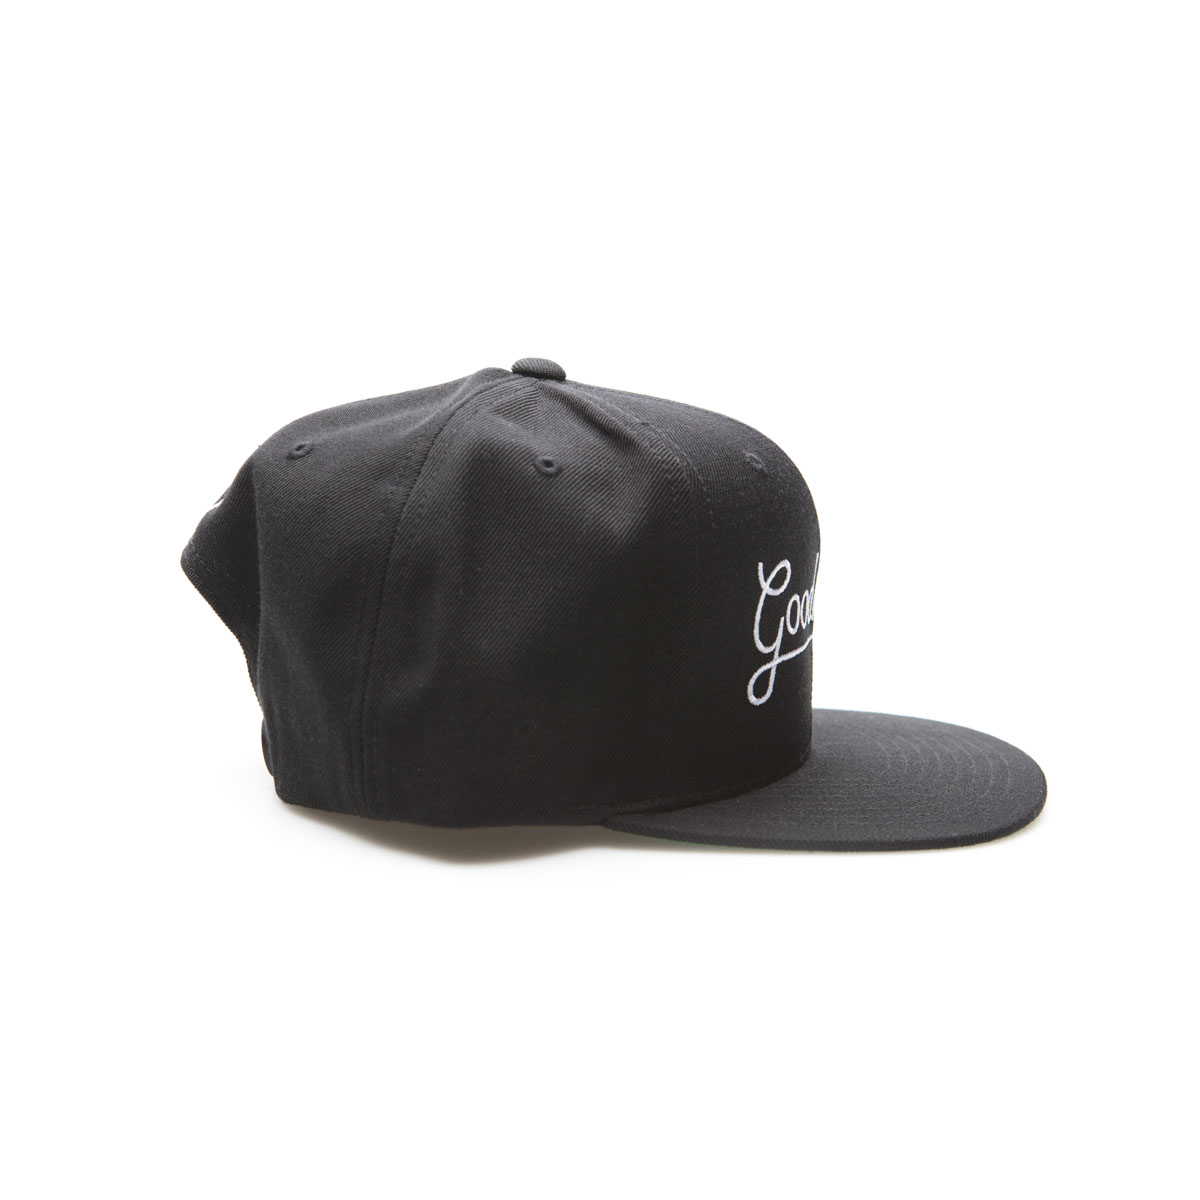 Goodnature Official Factory Issue Black Cap